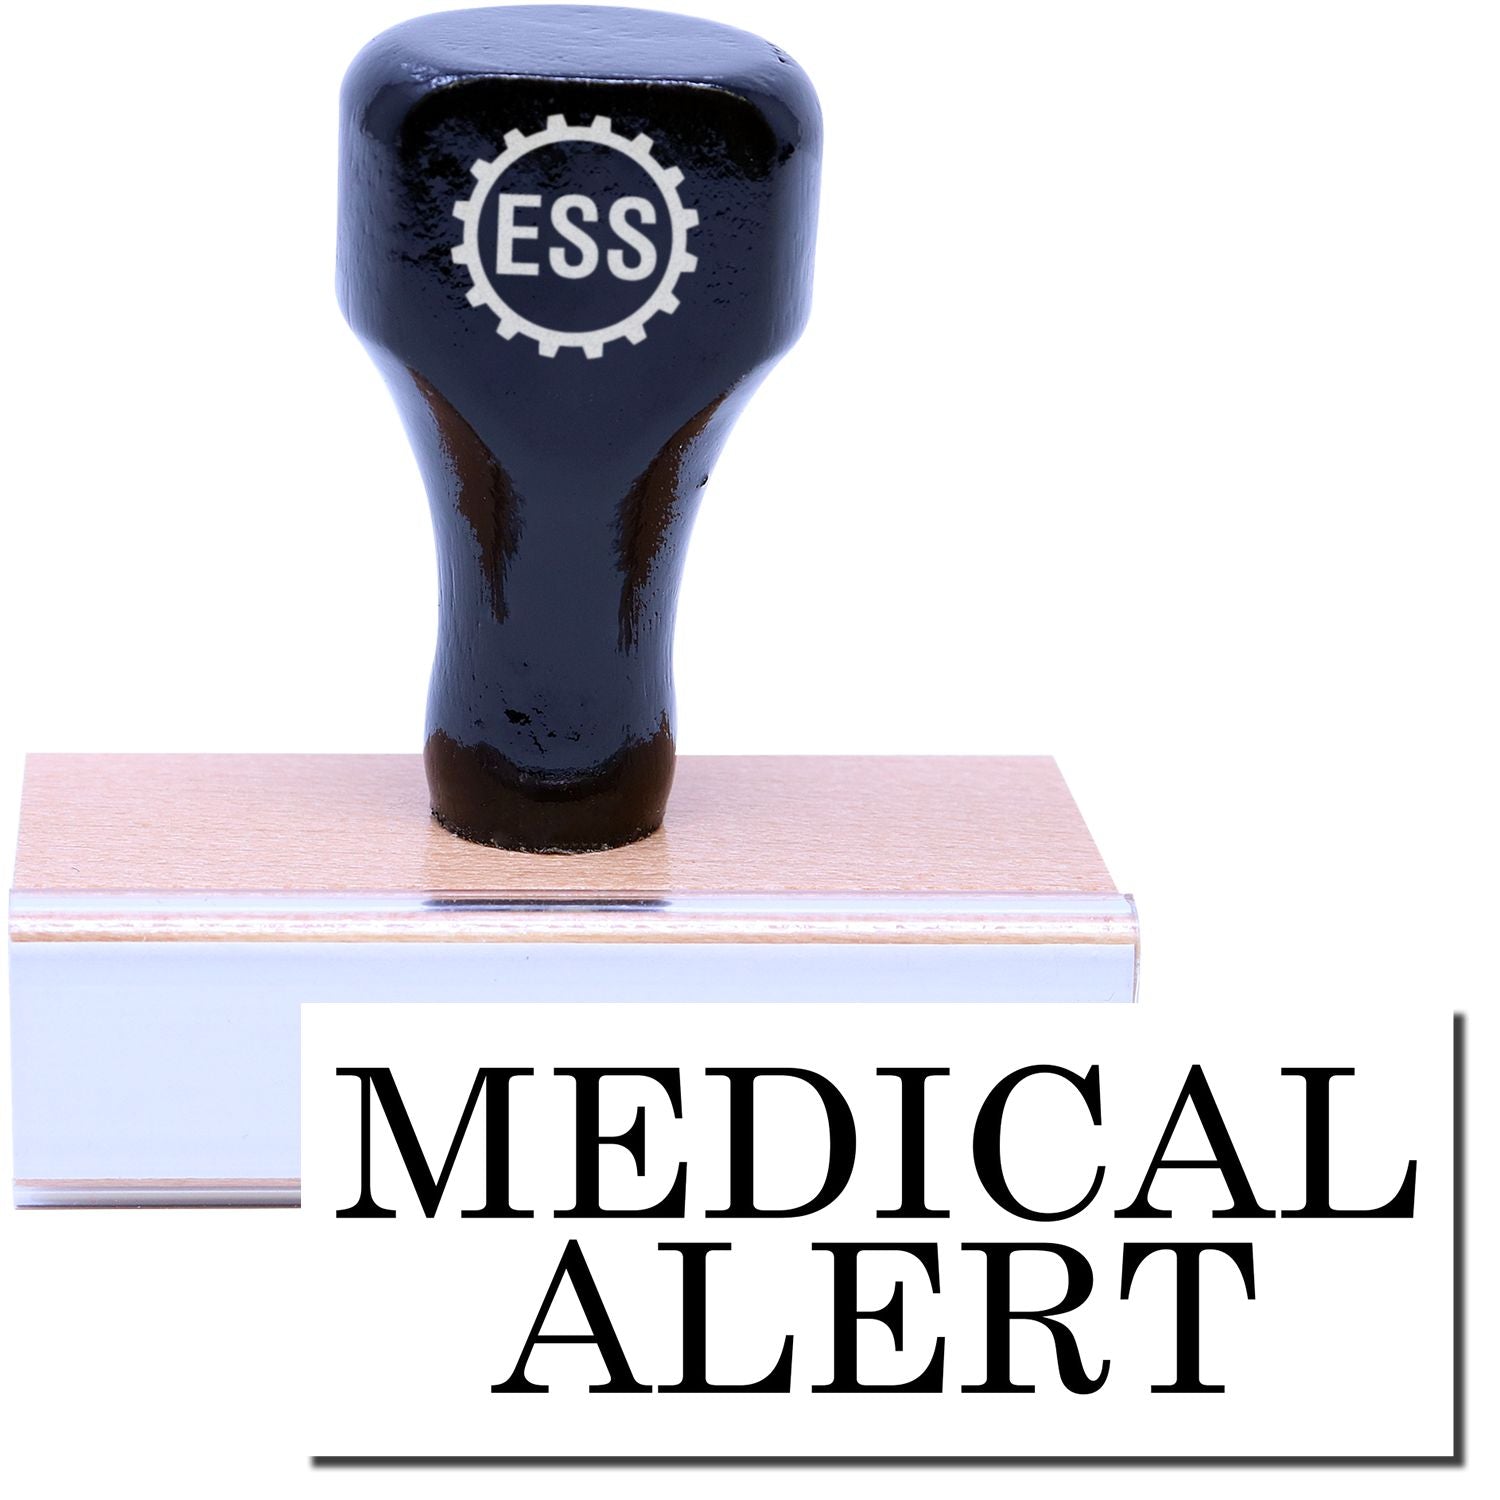 A stock office rubber stamp with a stamped image showing how the text "MEDICAL ALERT" in a large font is displayed after stamping.